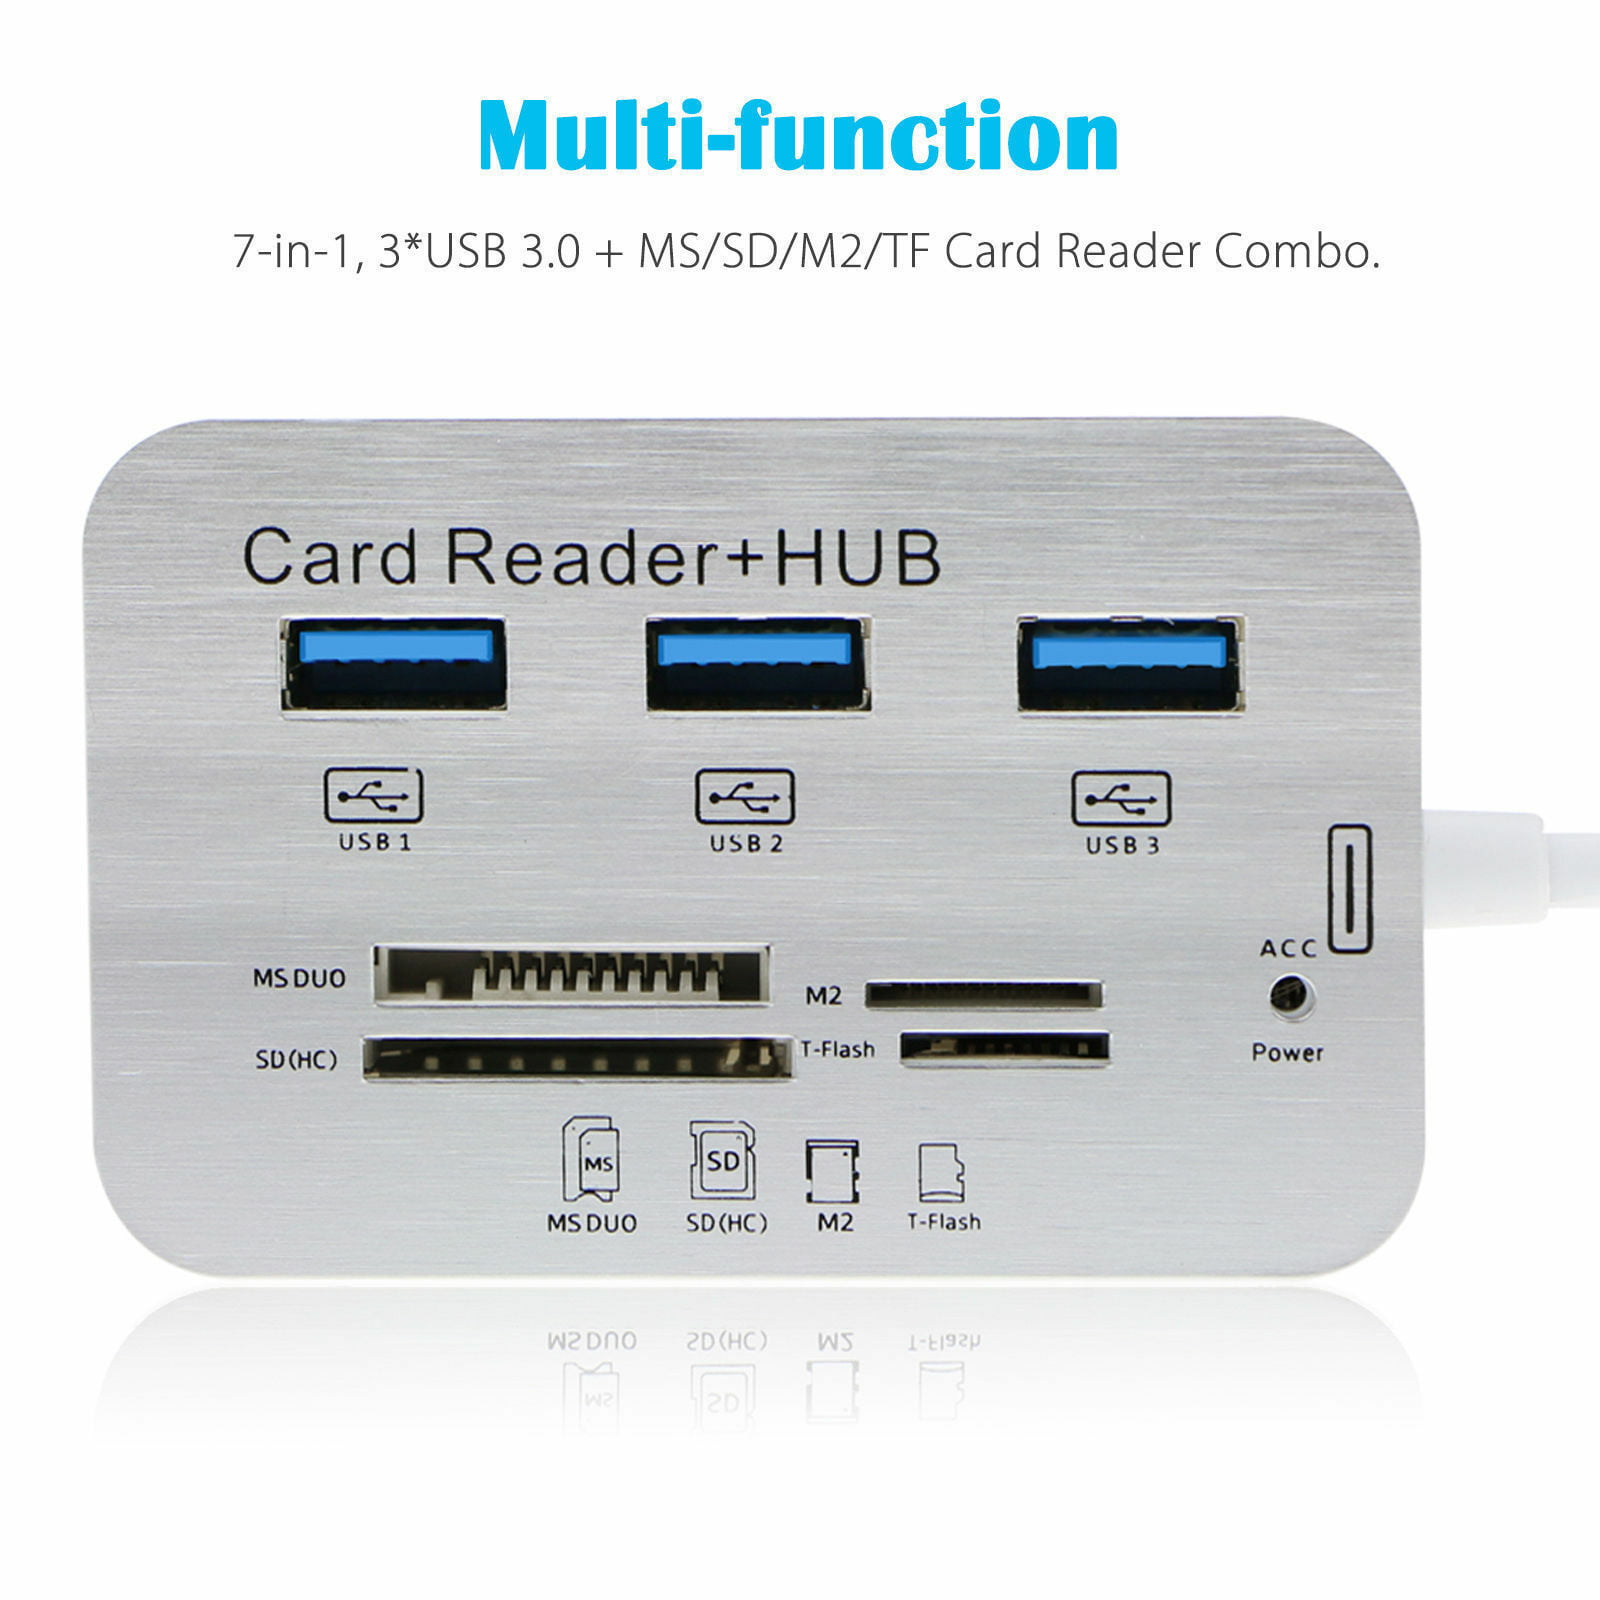 SD Card Reader USB Hub 3.0 with SD/TF/MMC/M2/MS/Micro SD Card Slot and 3  Port USB 3.0 Port USB Reader for PC Laptop and Other Devices